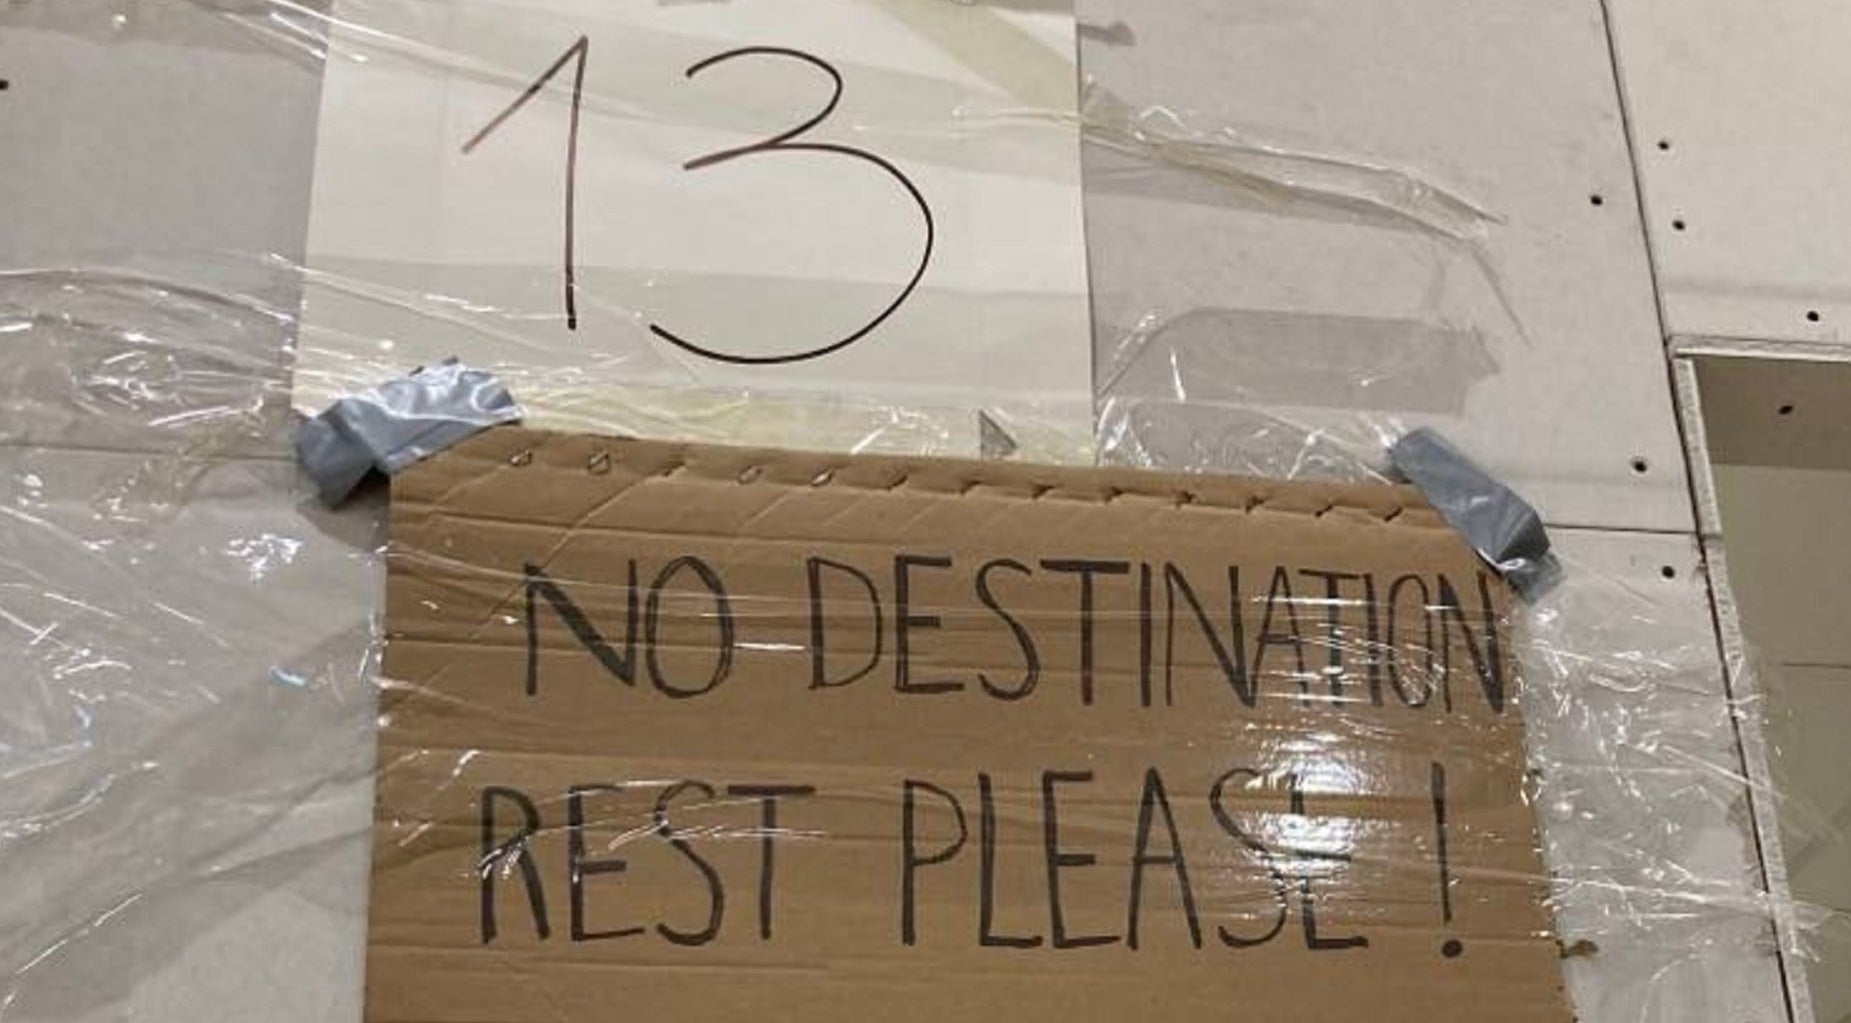 A sign at the refugee centre for people with no fixed destination (Laura Rice)